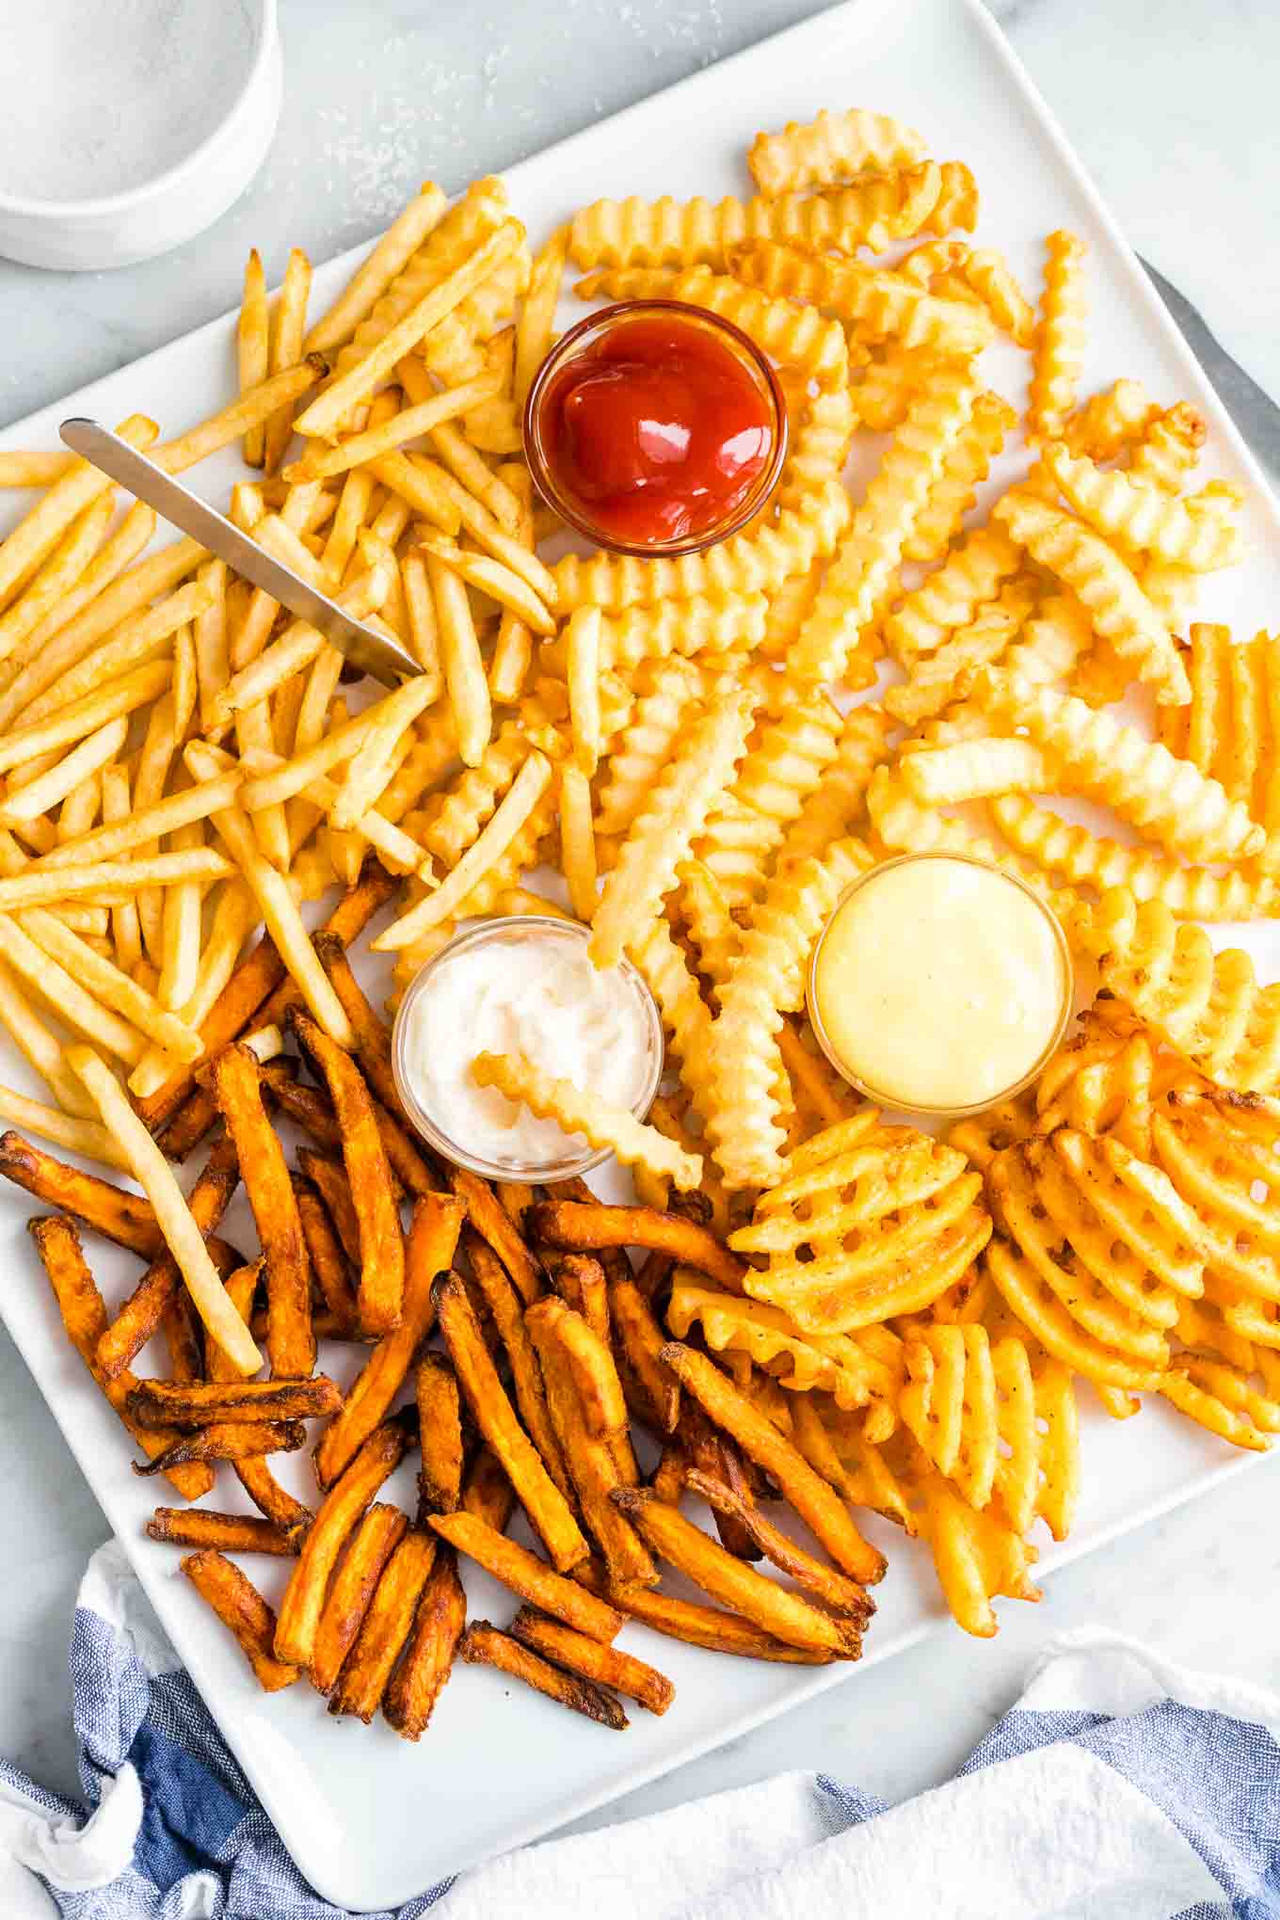 Delectable French Fries Variety Background